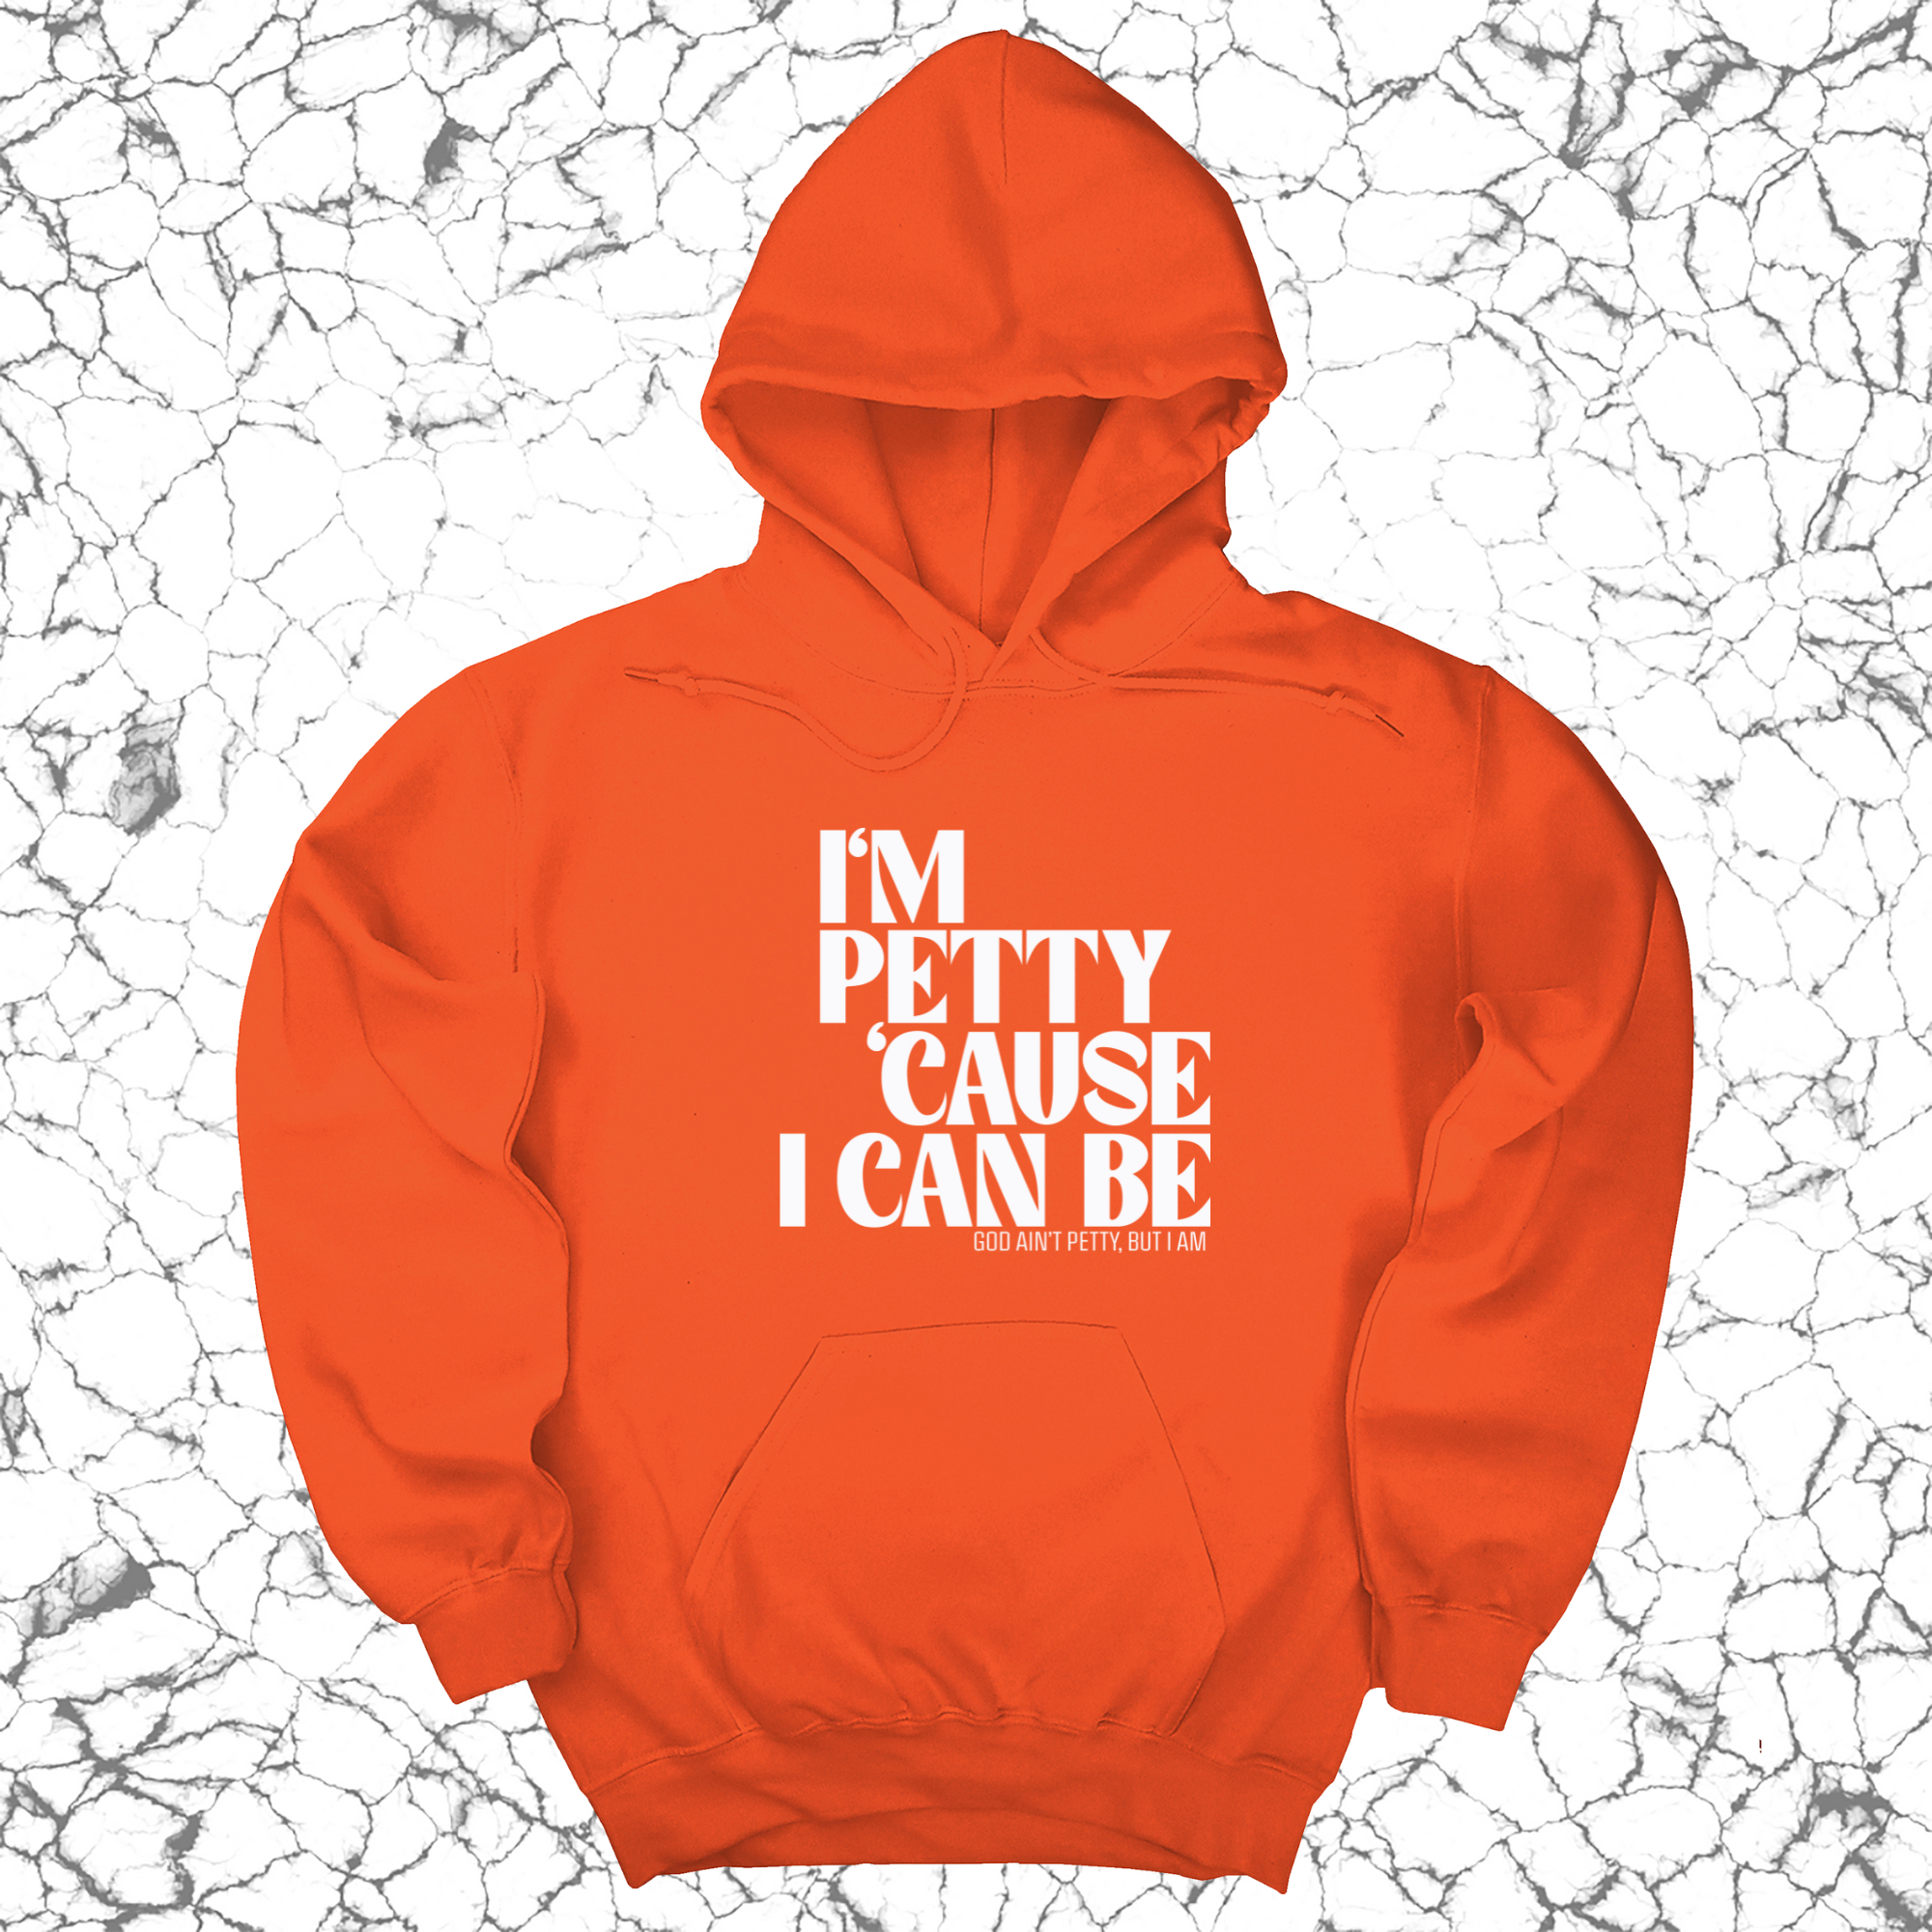 I'm petty cause I can be Unisex Hoodie-Hoodie-The Original God Ain't Petty But I Am